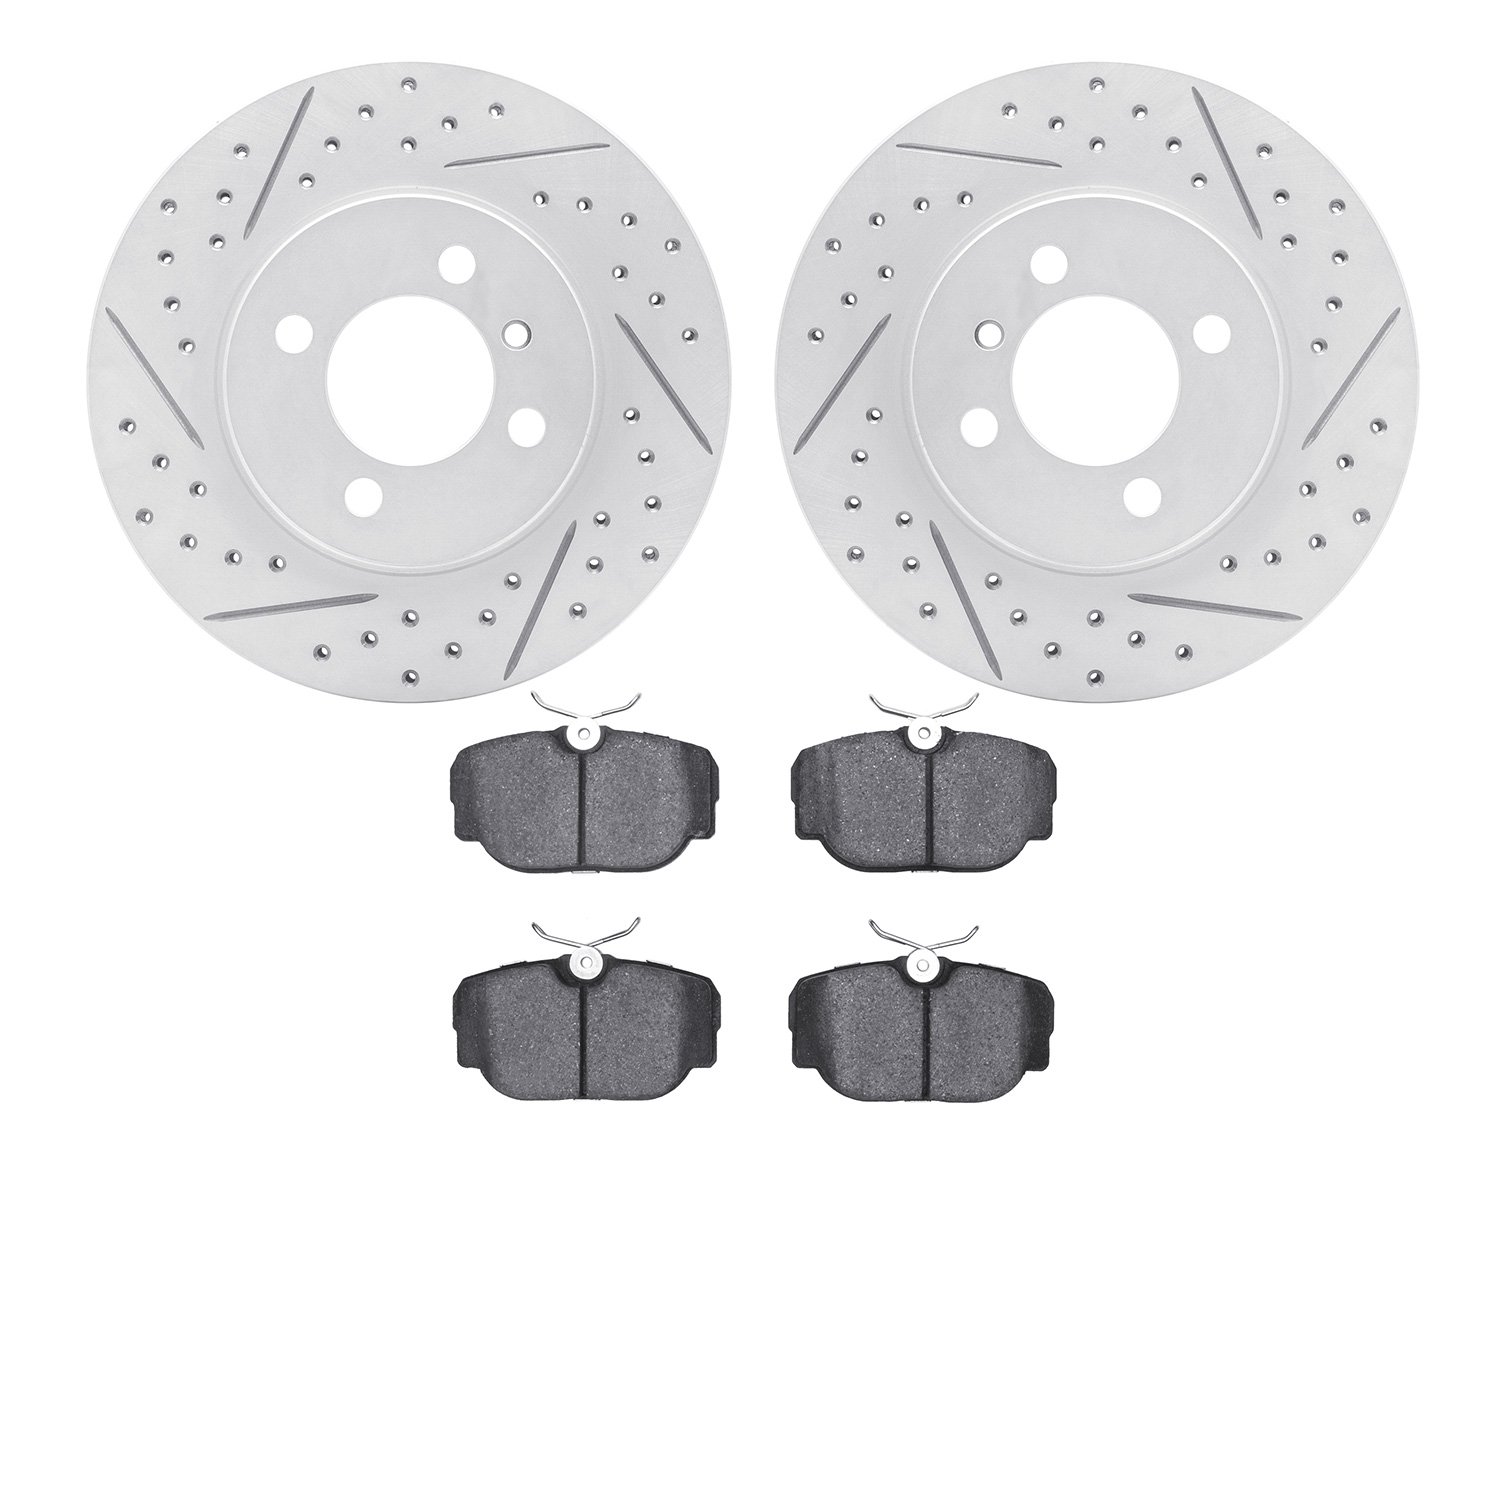 2502-31002 Geoperformance Drilled/Slotted Rotors w/5000 Advanced Brake Pads Kit, 1984-1991 BMW, Position: Front